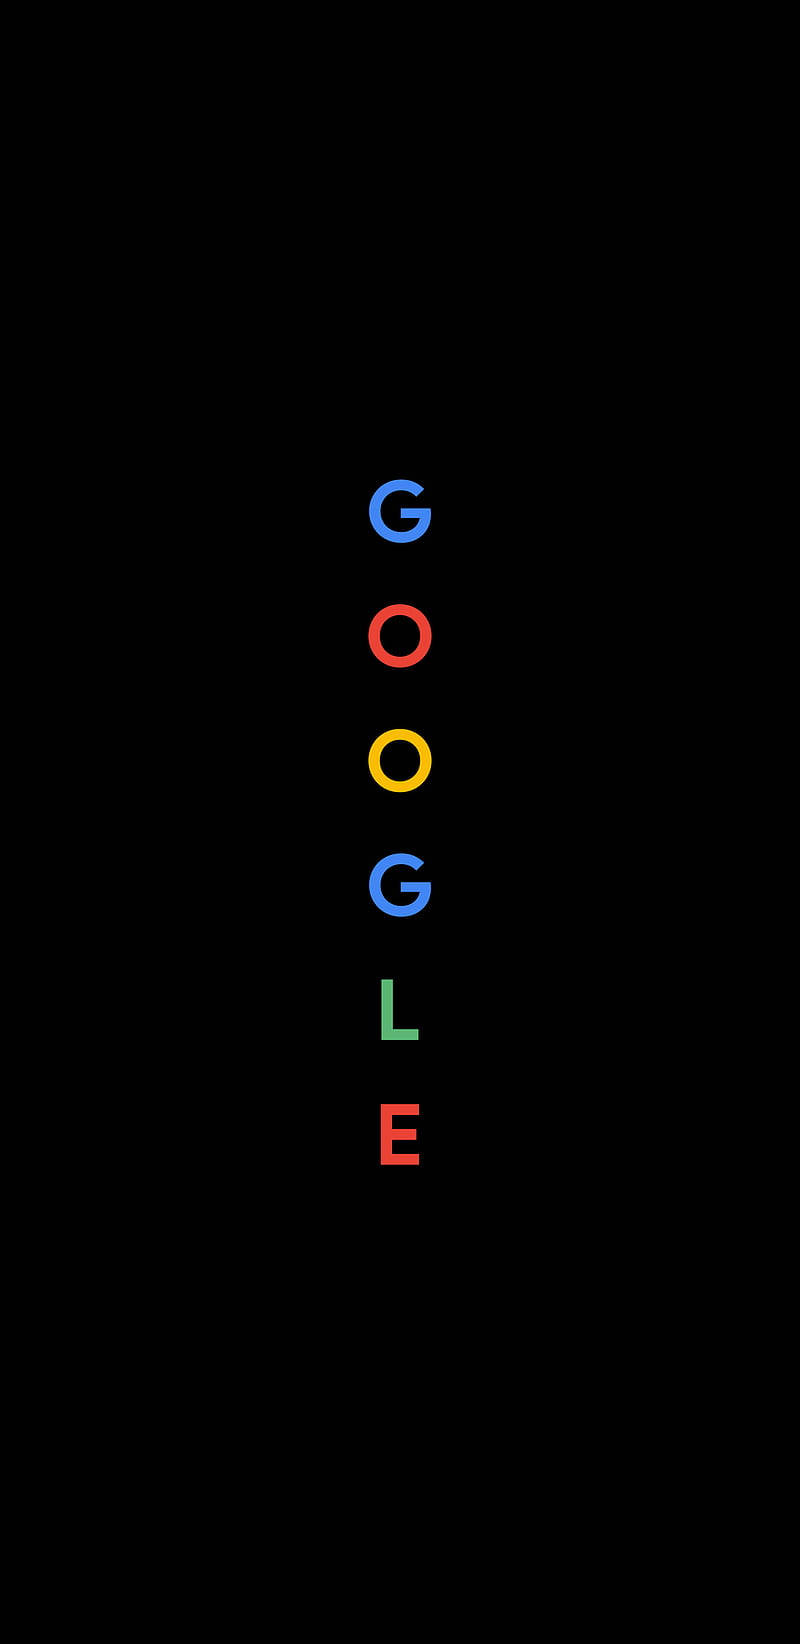 800X1644 Google Wallpaper and Background